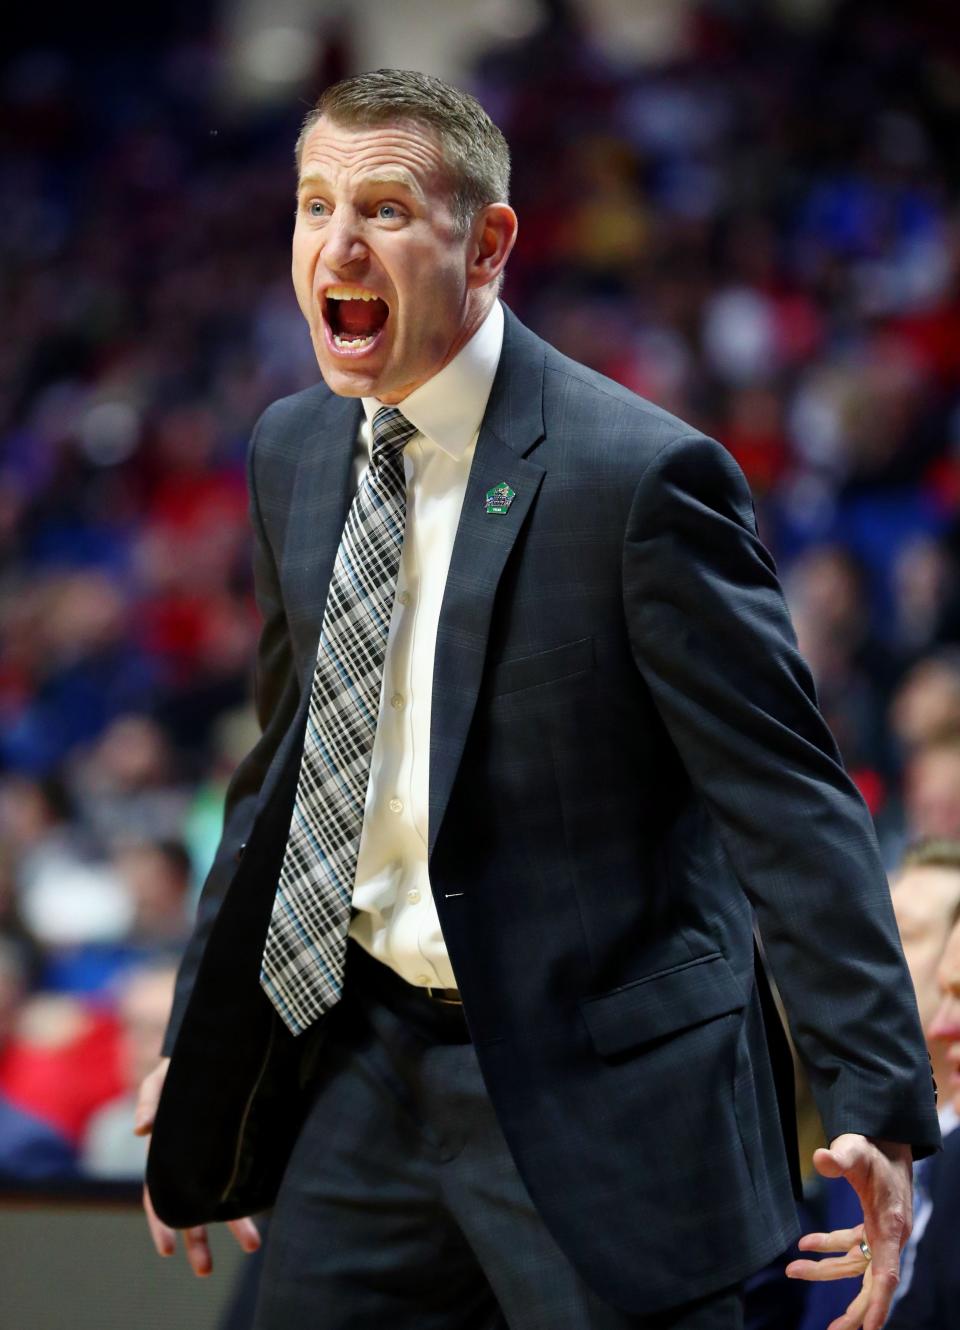 Mar 22, 2019; Tulsa, OK, USA; Buffalo Bulls head coach Nate Oats reacts during the first half of their game against the Arizona State Sun Devils in the first round of the 2019 NCAA Tournament at BOK Center. Mandatory Credit: Mark J. Rebilas-USA TODAY Sports